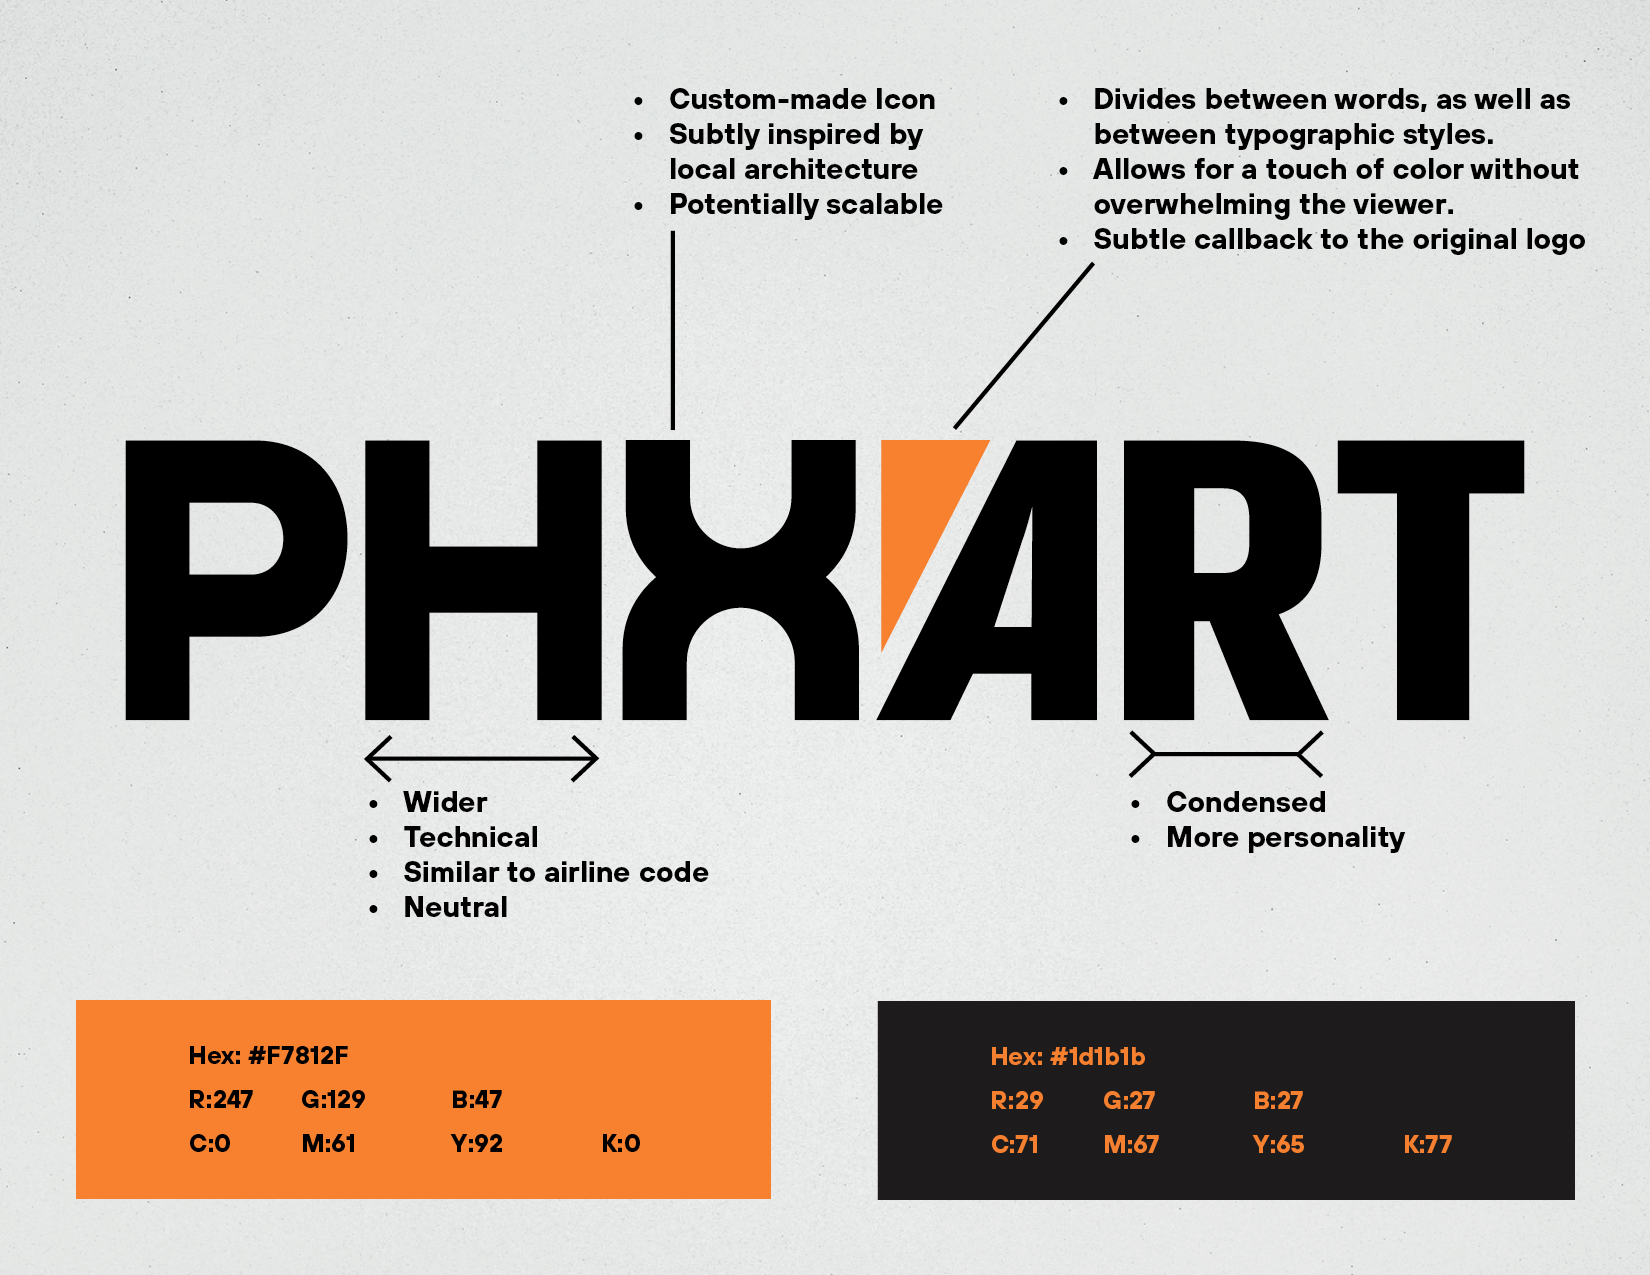 A spec sheet that goes over the brand colors I've chosen (a bright vibrant orange, and a dark muted orange black), as well as giving some context into the logo itself such as how it is inspired by the architecture of the city of Phoenix.